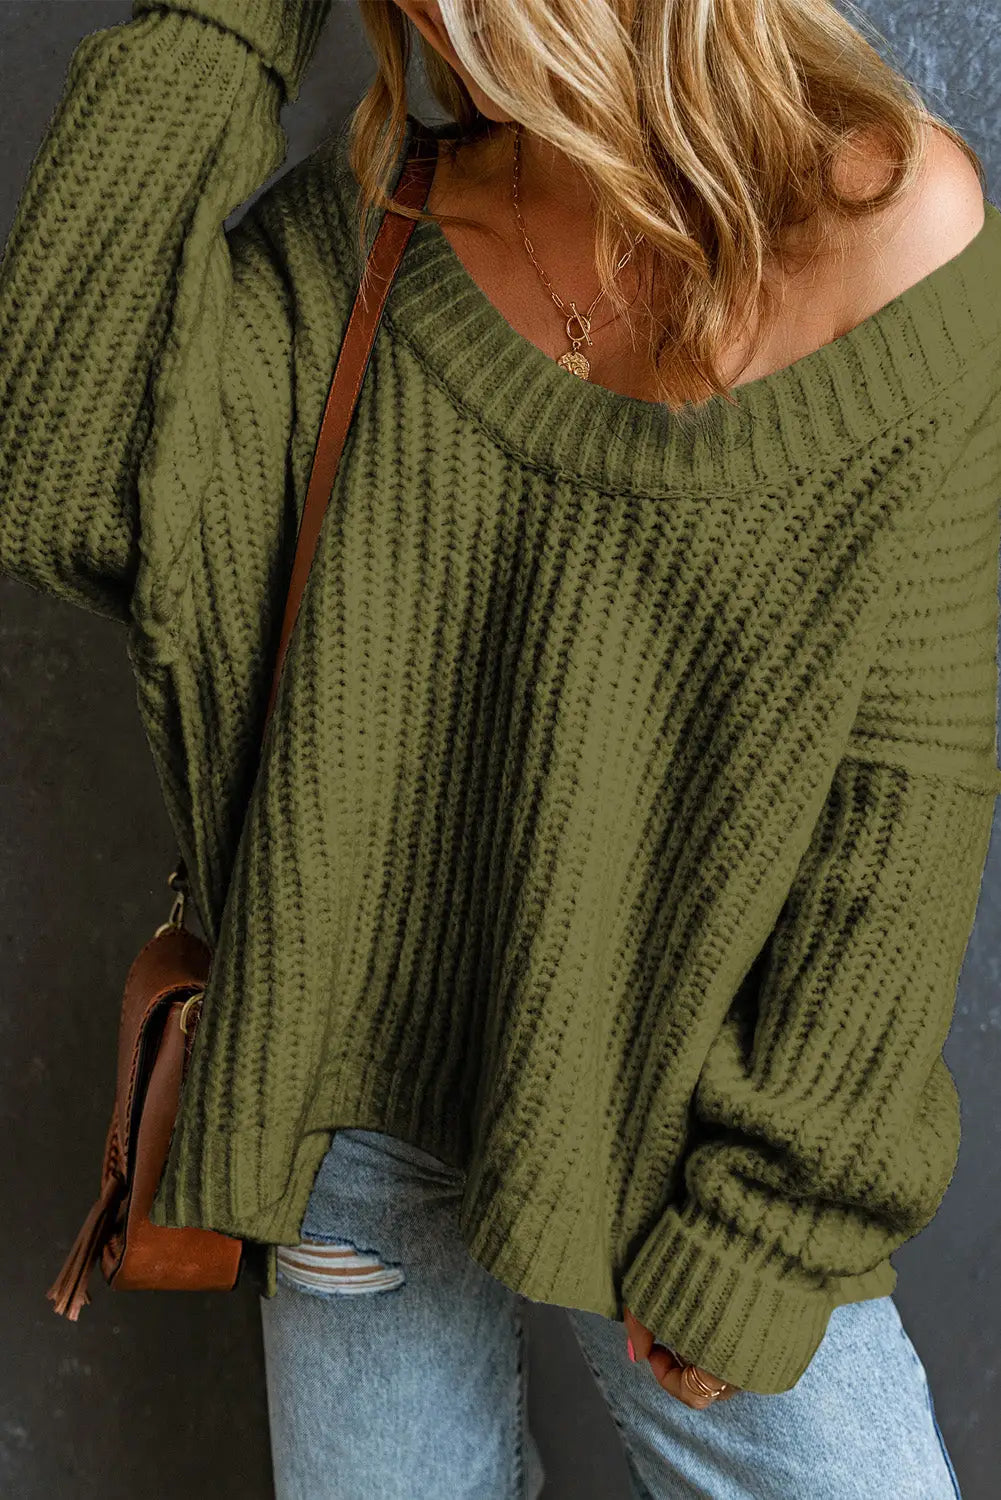 Pickle green ribbed knit round neck slouchy chunky sweater - s / 100% acrylic - sweaters & cardigans